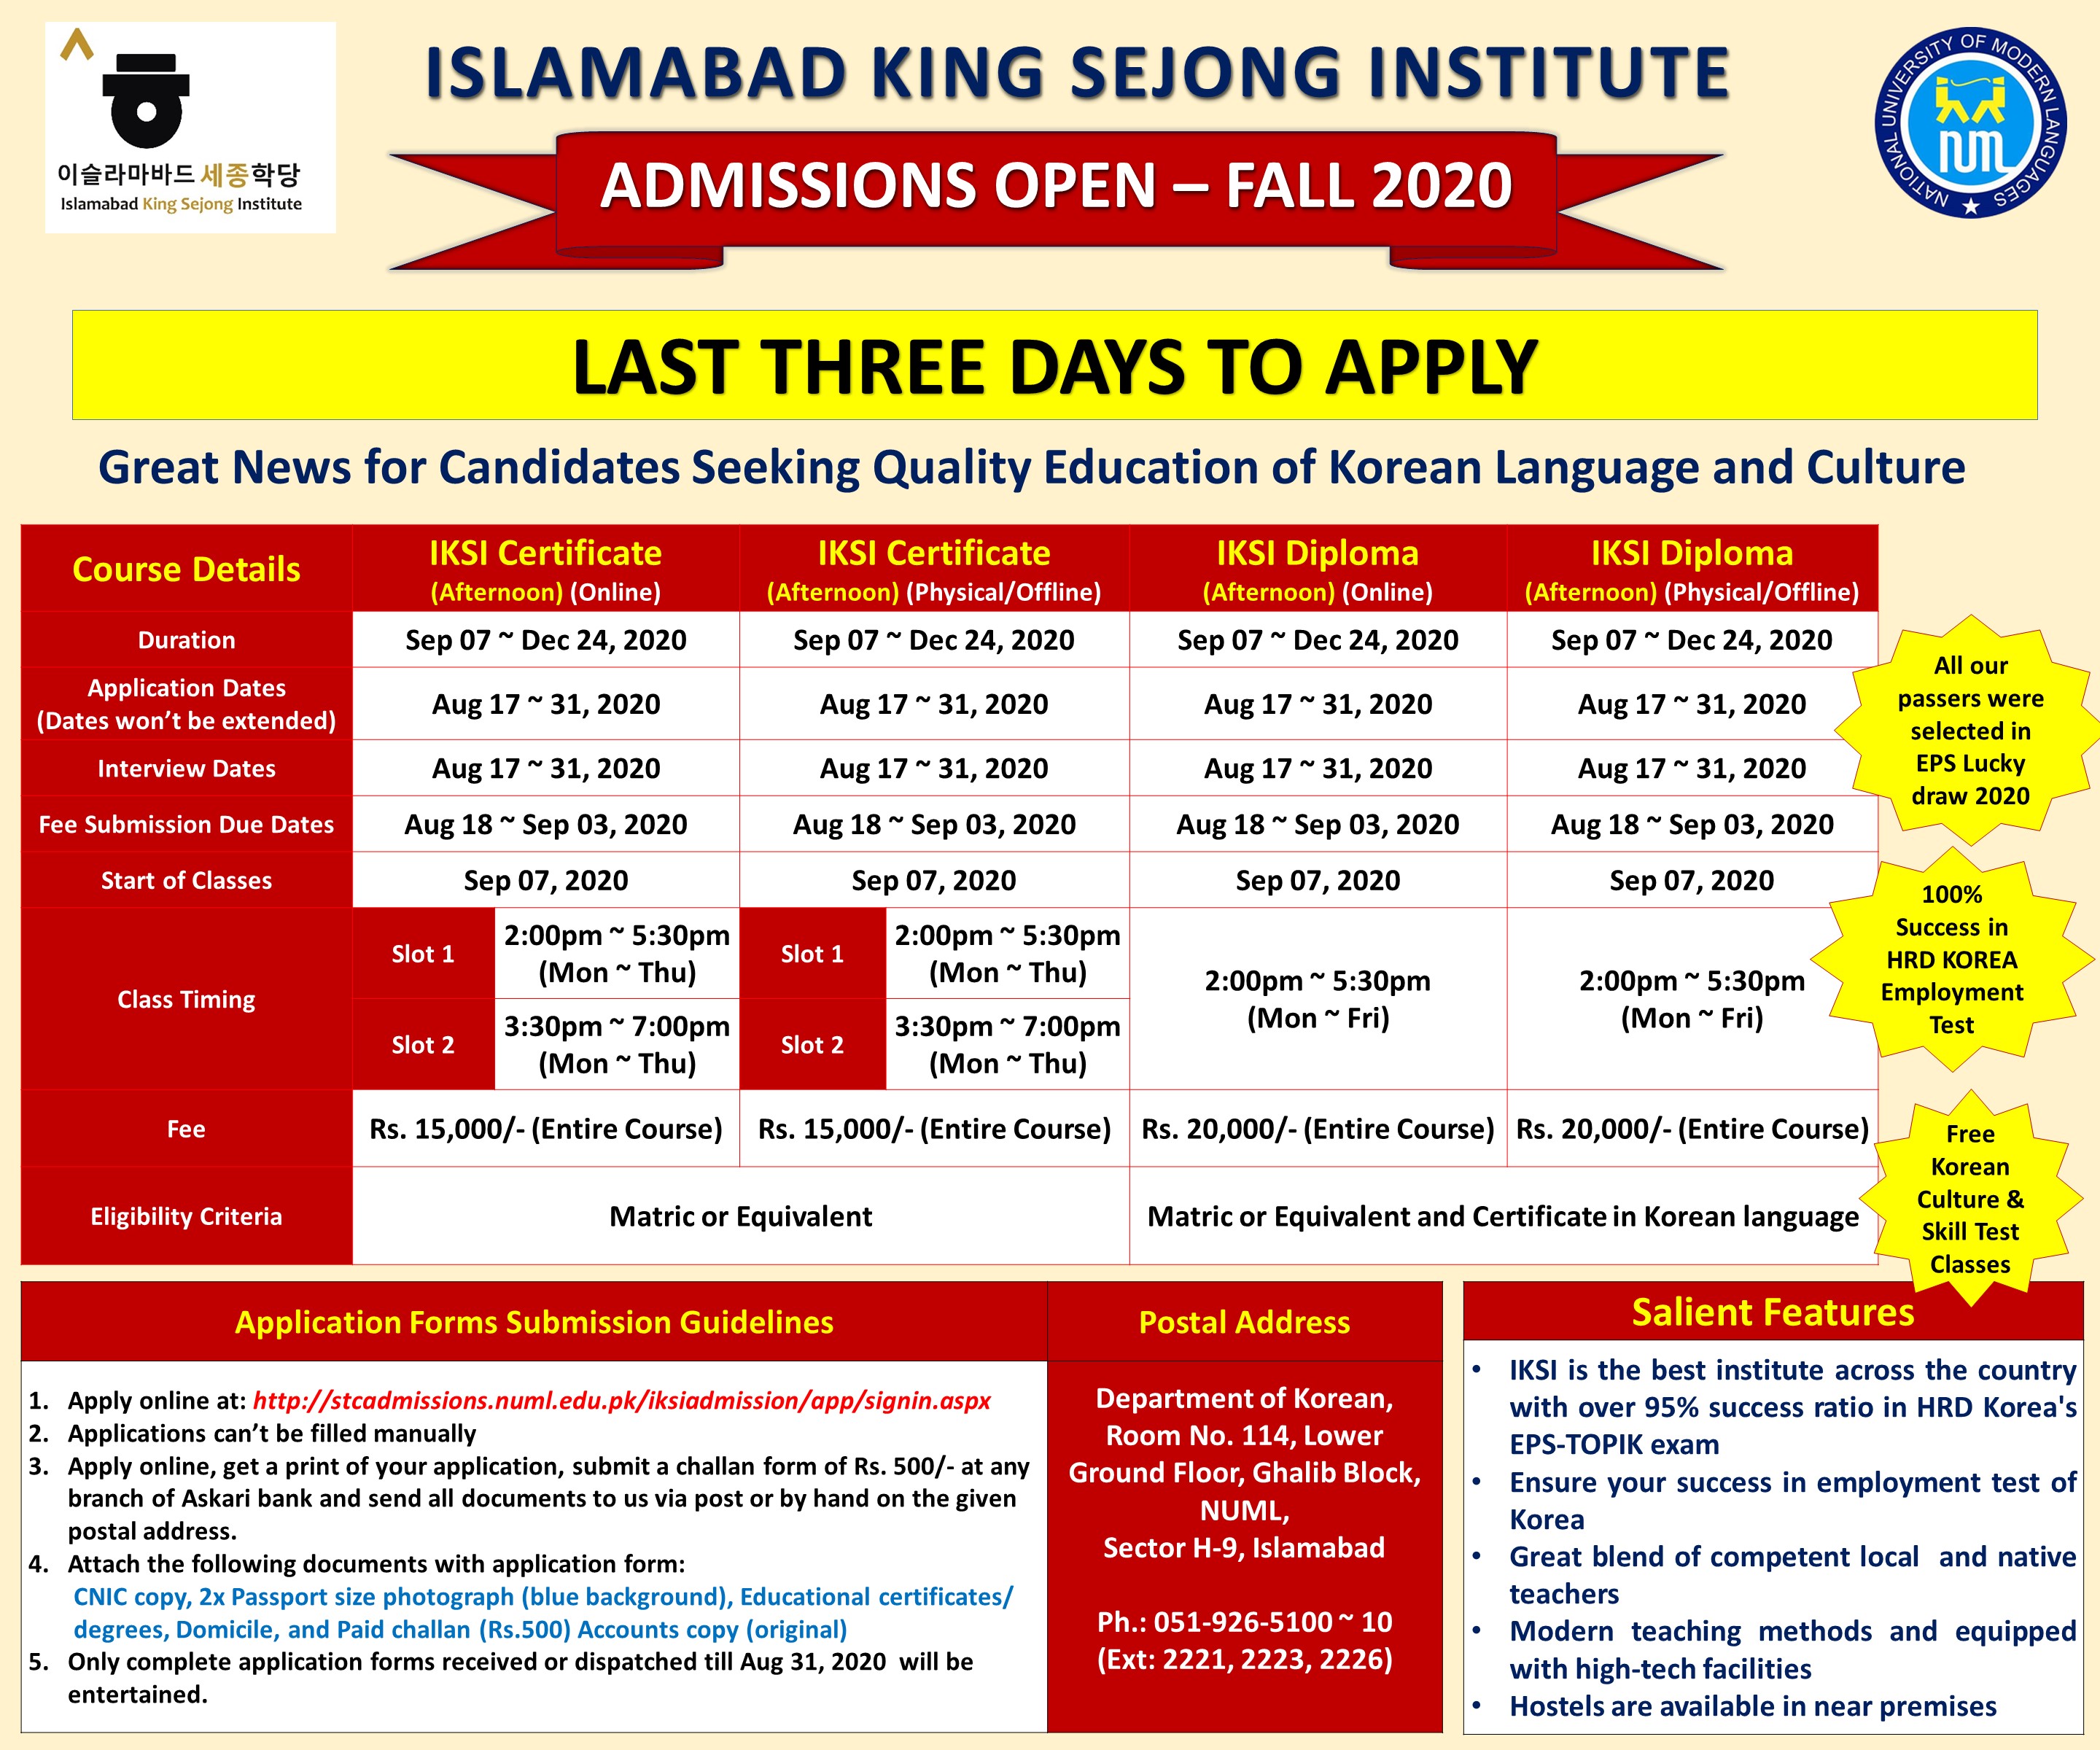 ISLAMABAD KING SEJONG INSTITUTE - FALL 2020 ADMISSION OPEN